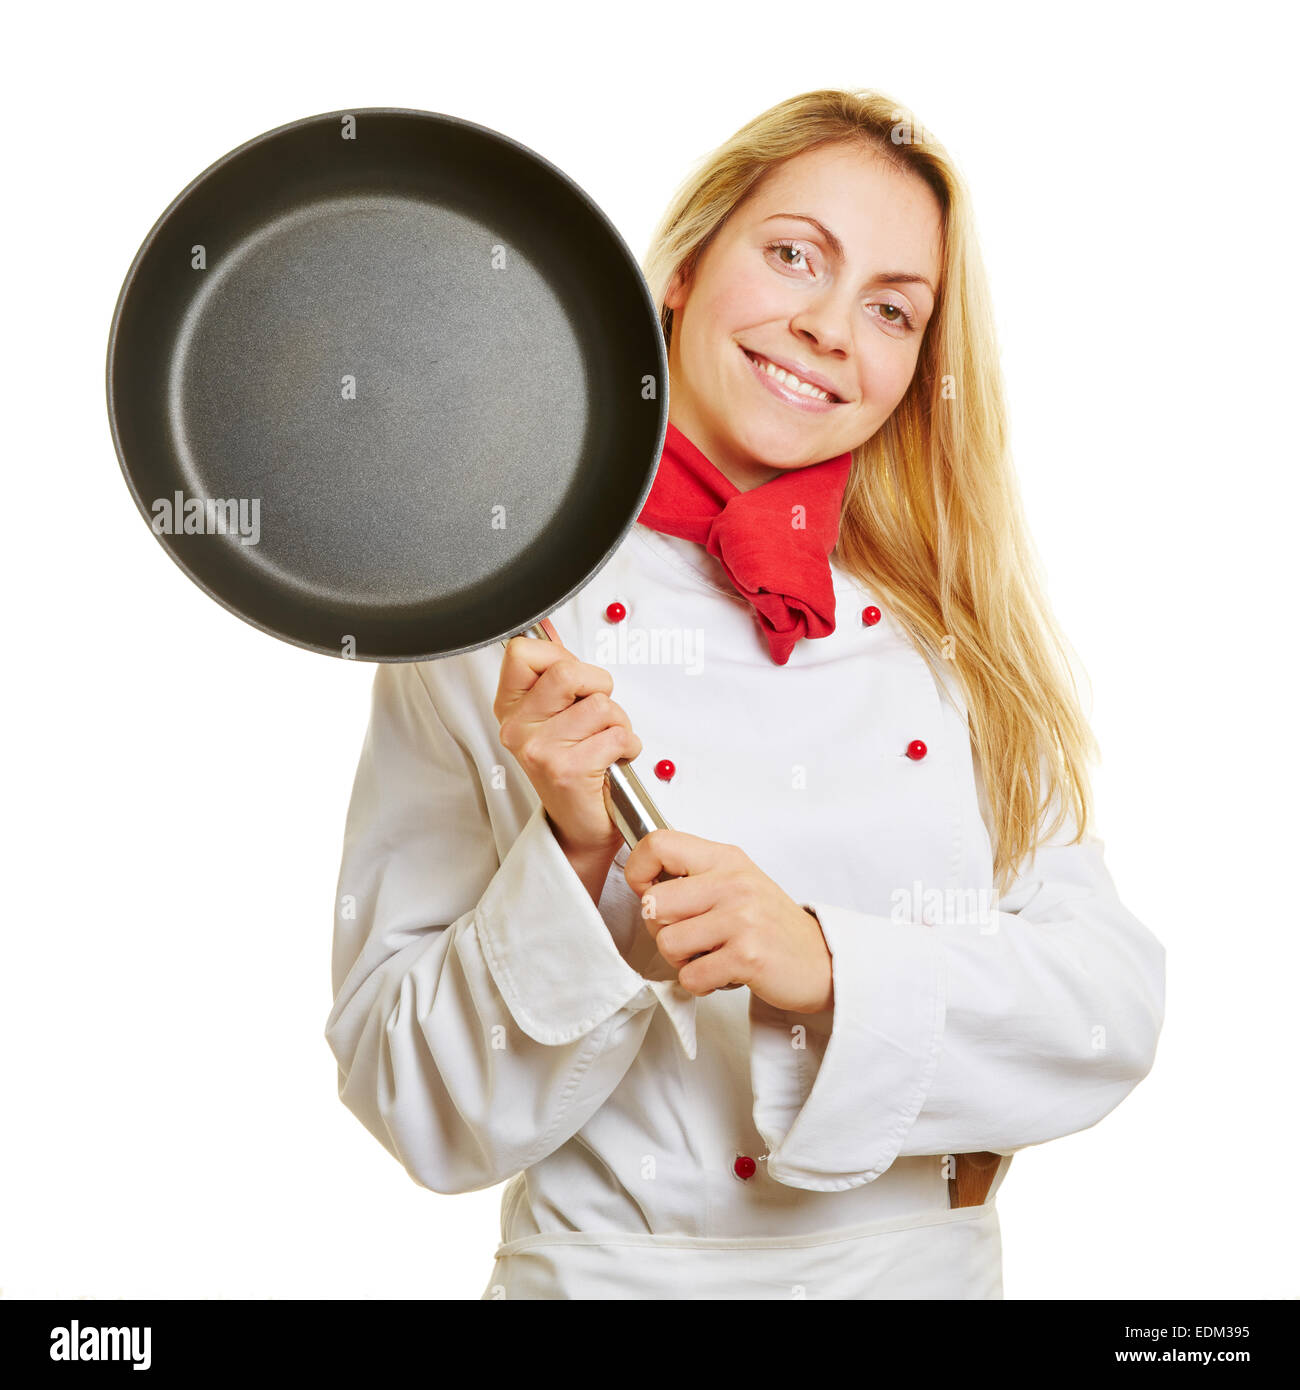 Vegetables fry on a large frying pan on fire. Cooking at the festival. Girl  chef pouring vegetables into disposable utensils. Stock Photo